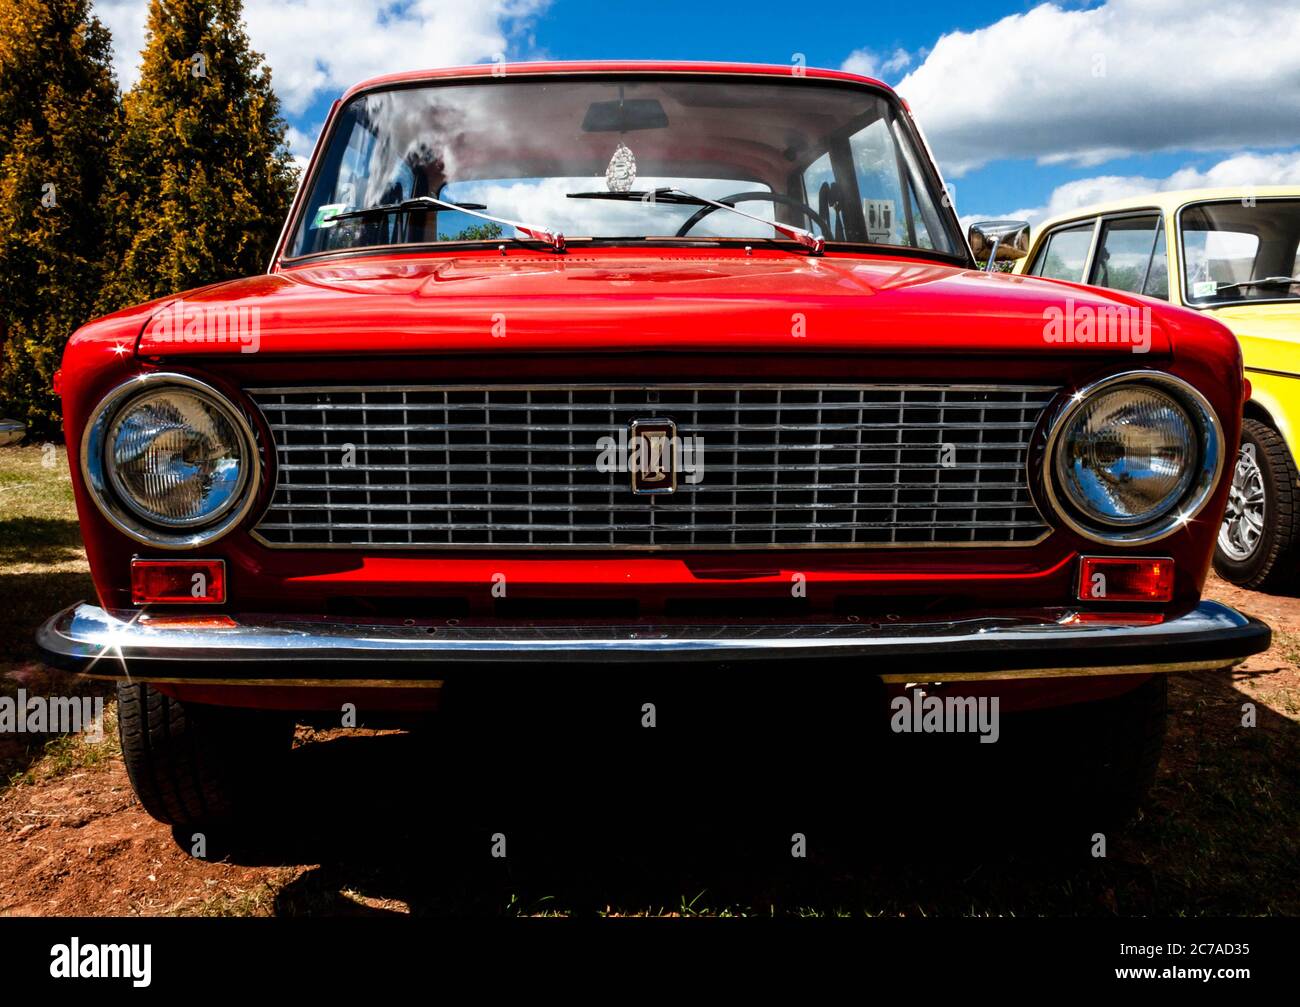 Front of red Soviet Lada passenger car displayed during annual Lilac festival in Dobele. Stock Photo